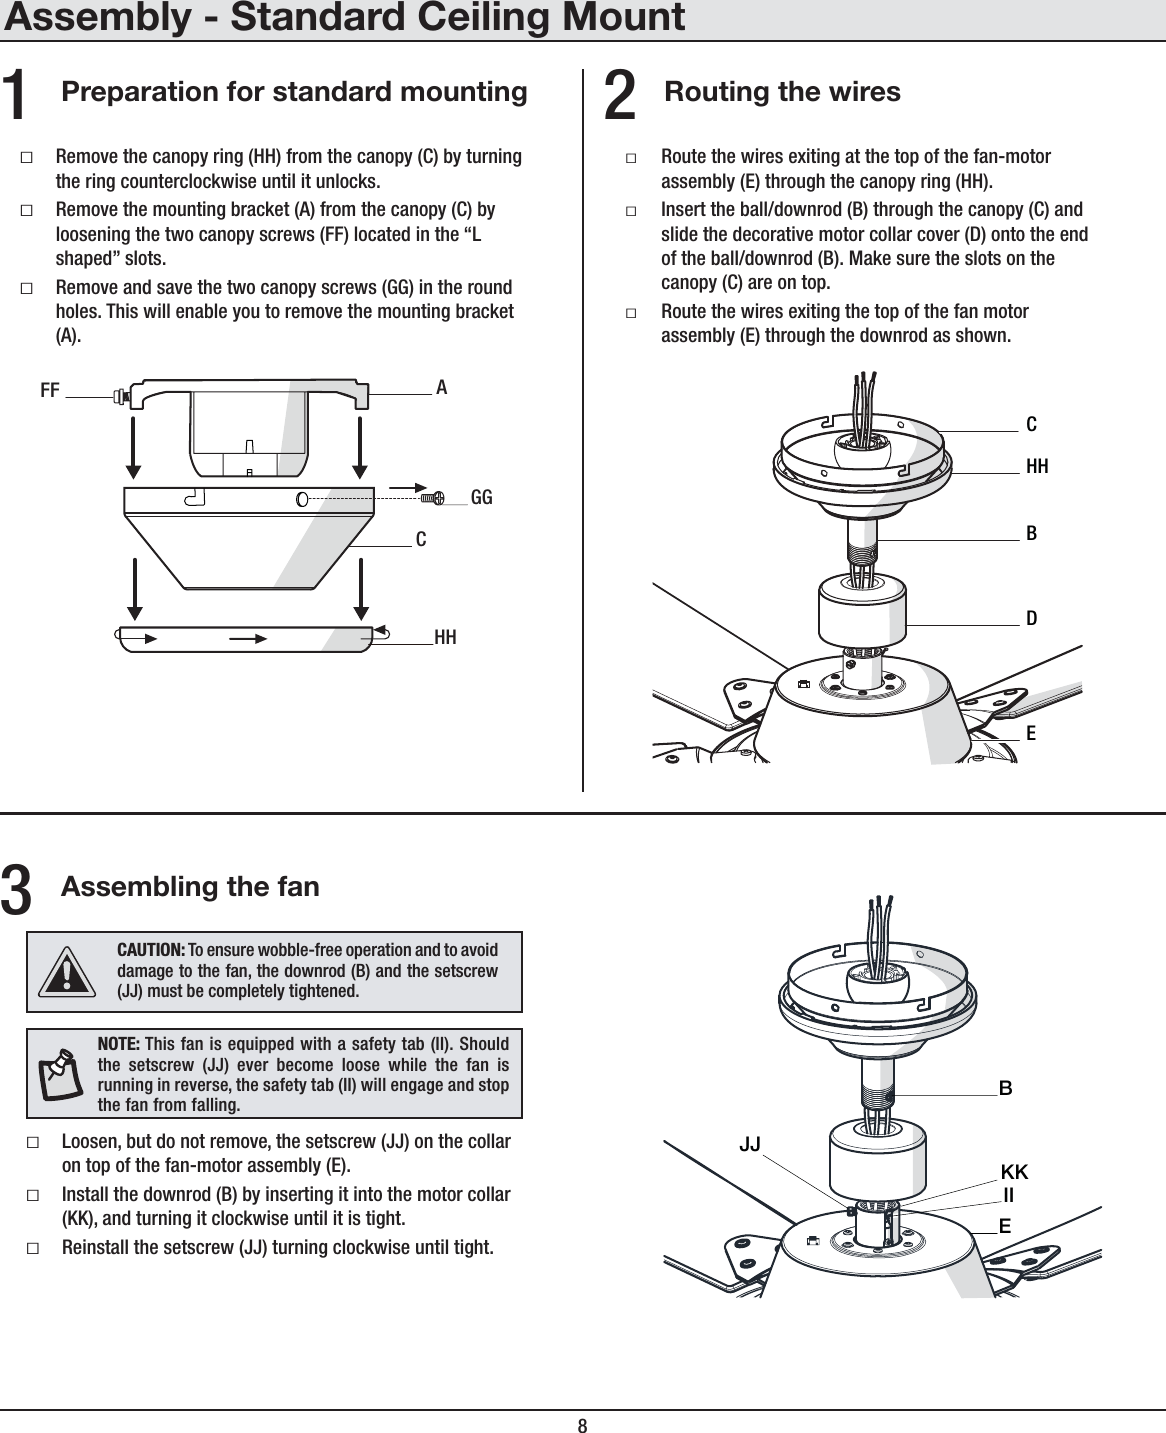 8Assembly - Standard Ceiling MountRouting the wiresPreparation for standard mountingƑRoute the wires exiting at the top of the fan-motor assembly (E) through the canopy ring (HH).ƑInsert the ball/downrod (B) through the canopy (C) and slide the decorative motor collar cover (D) onto the end of the ball/downrod (B). Make sure the slots on the canopy (C) are on top.ƑRoute the wires exiting the top of the fan motor assembly (E) through the downrod as shown.21CAHHGGFFECDBHHƑRemove the canopy ring (HH) from the canopy (C) by turning the ring counterclockwise until it unlocks.ƑRemove the mounting bracket (A) from the canopy (C) byloosening the two canopy screws (FF) located in the “L shaped” slots.ƑRemove and save the two canopy screws (GG) in the round holes. This will enable you to remove the mounting bracket (A).Assembling the fanƑLoosen, but do not remove, the setscrew (JJ) on the collar on top of the fan-motor assembly (E).ƑInstall the downrod (B) by inserting it into the motor collar (KK), and turning it clockwise until it is tight.ƑReinstall the setscrew (JJ) turning clockwise until tight.3IIJJBEKKNOTE: This fan is equipped with a safety tab (II). Should the setscrew (JJ) ever become loose while the fan is running in reverse, the safety tab (II) will engage and stop the fan from falling.CAUTION: To ensure wobble-free operation and to avoid damage to the fan, the downrod (B) and the setscrew (JJ) must be completely tightened.